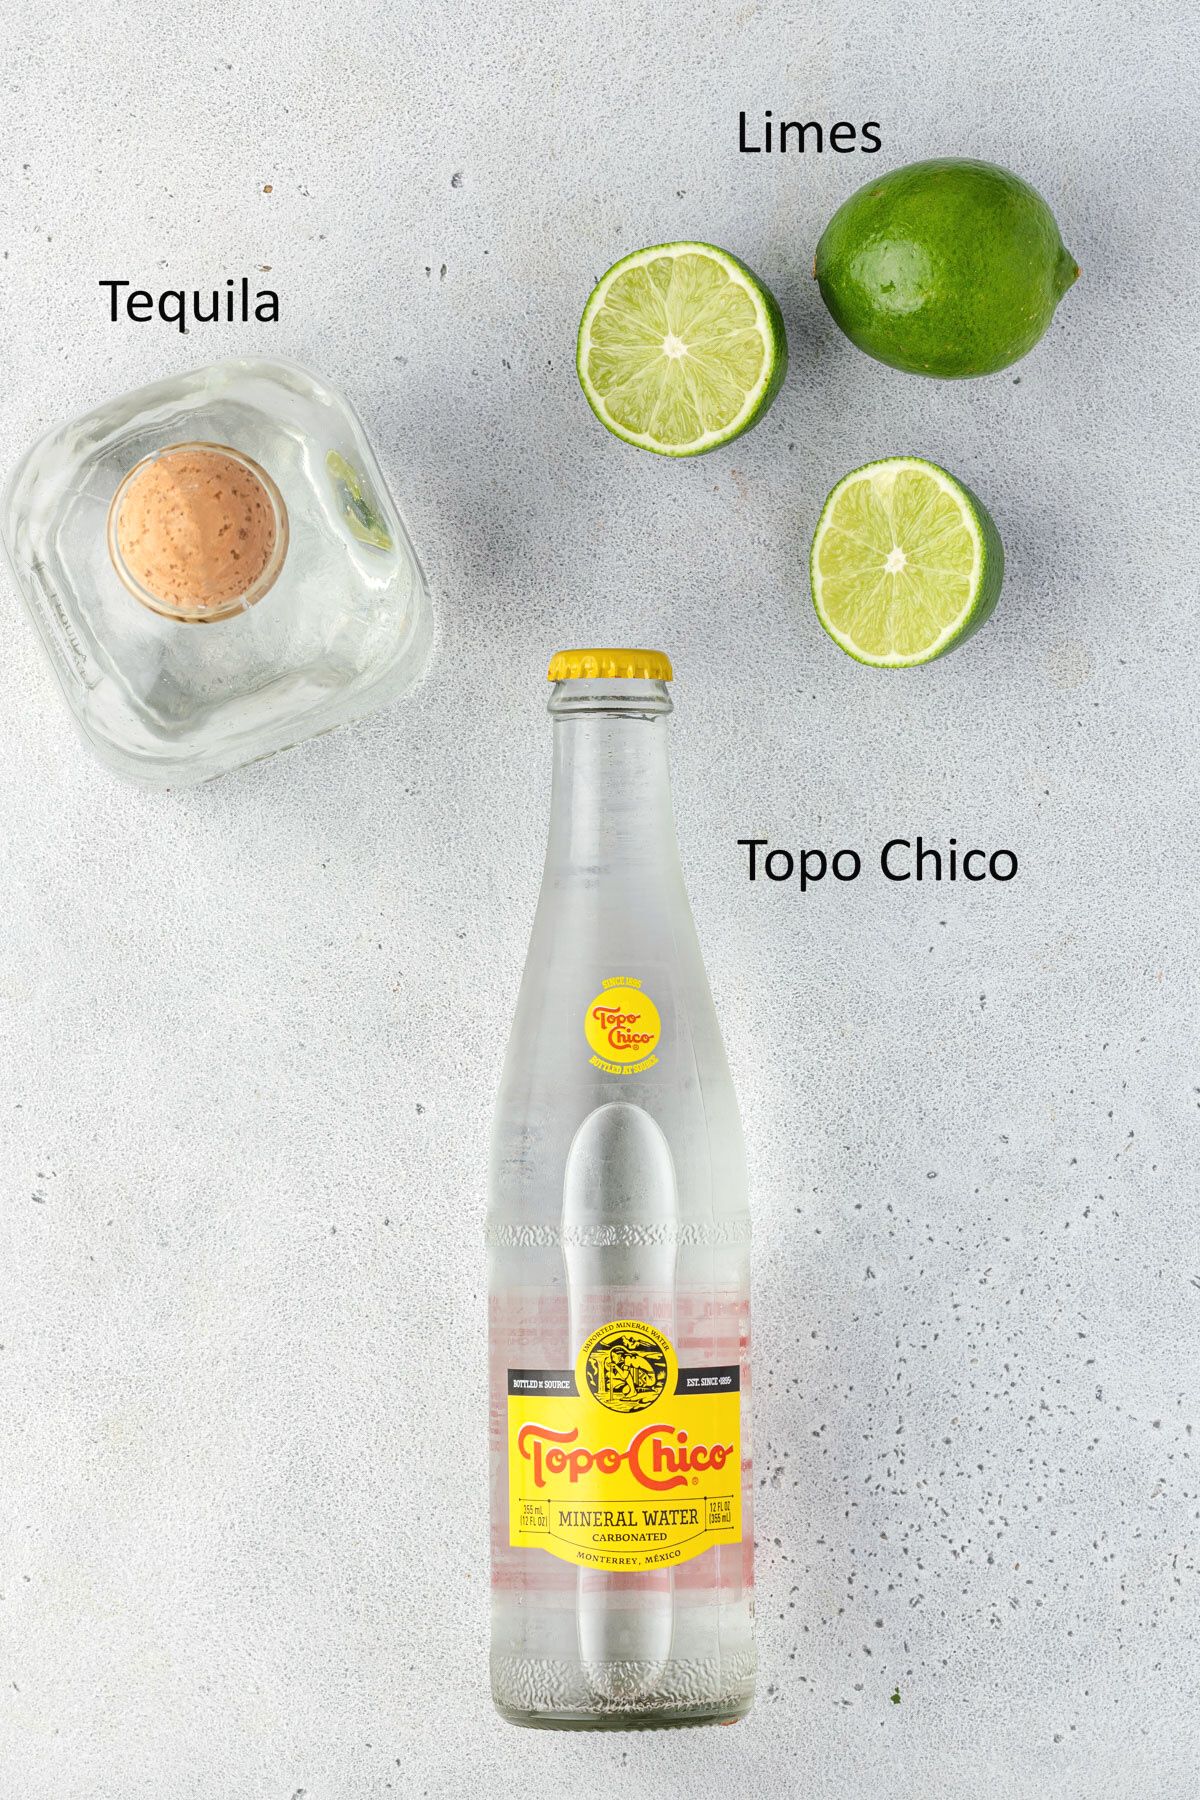 Overhead of bottle of tequila, Topo Chico, and limes on a cement surface.